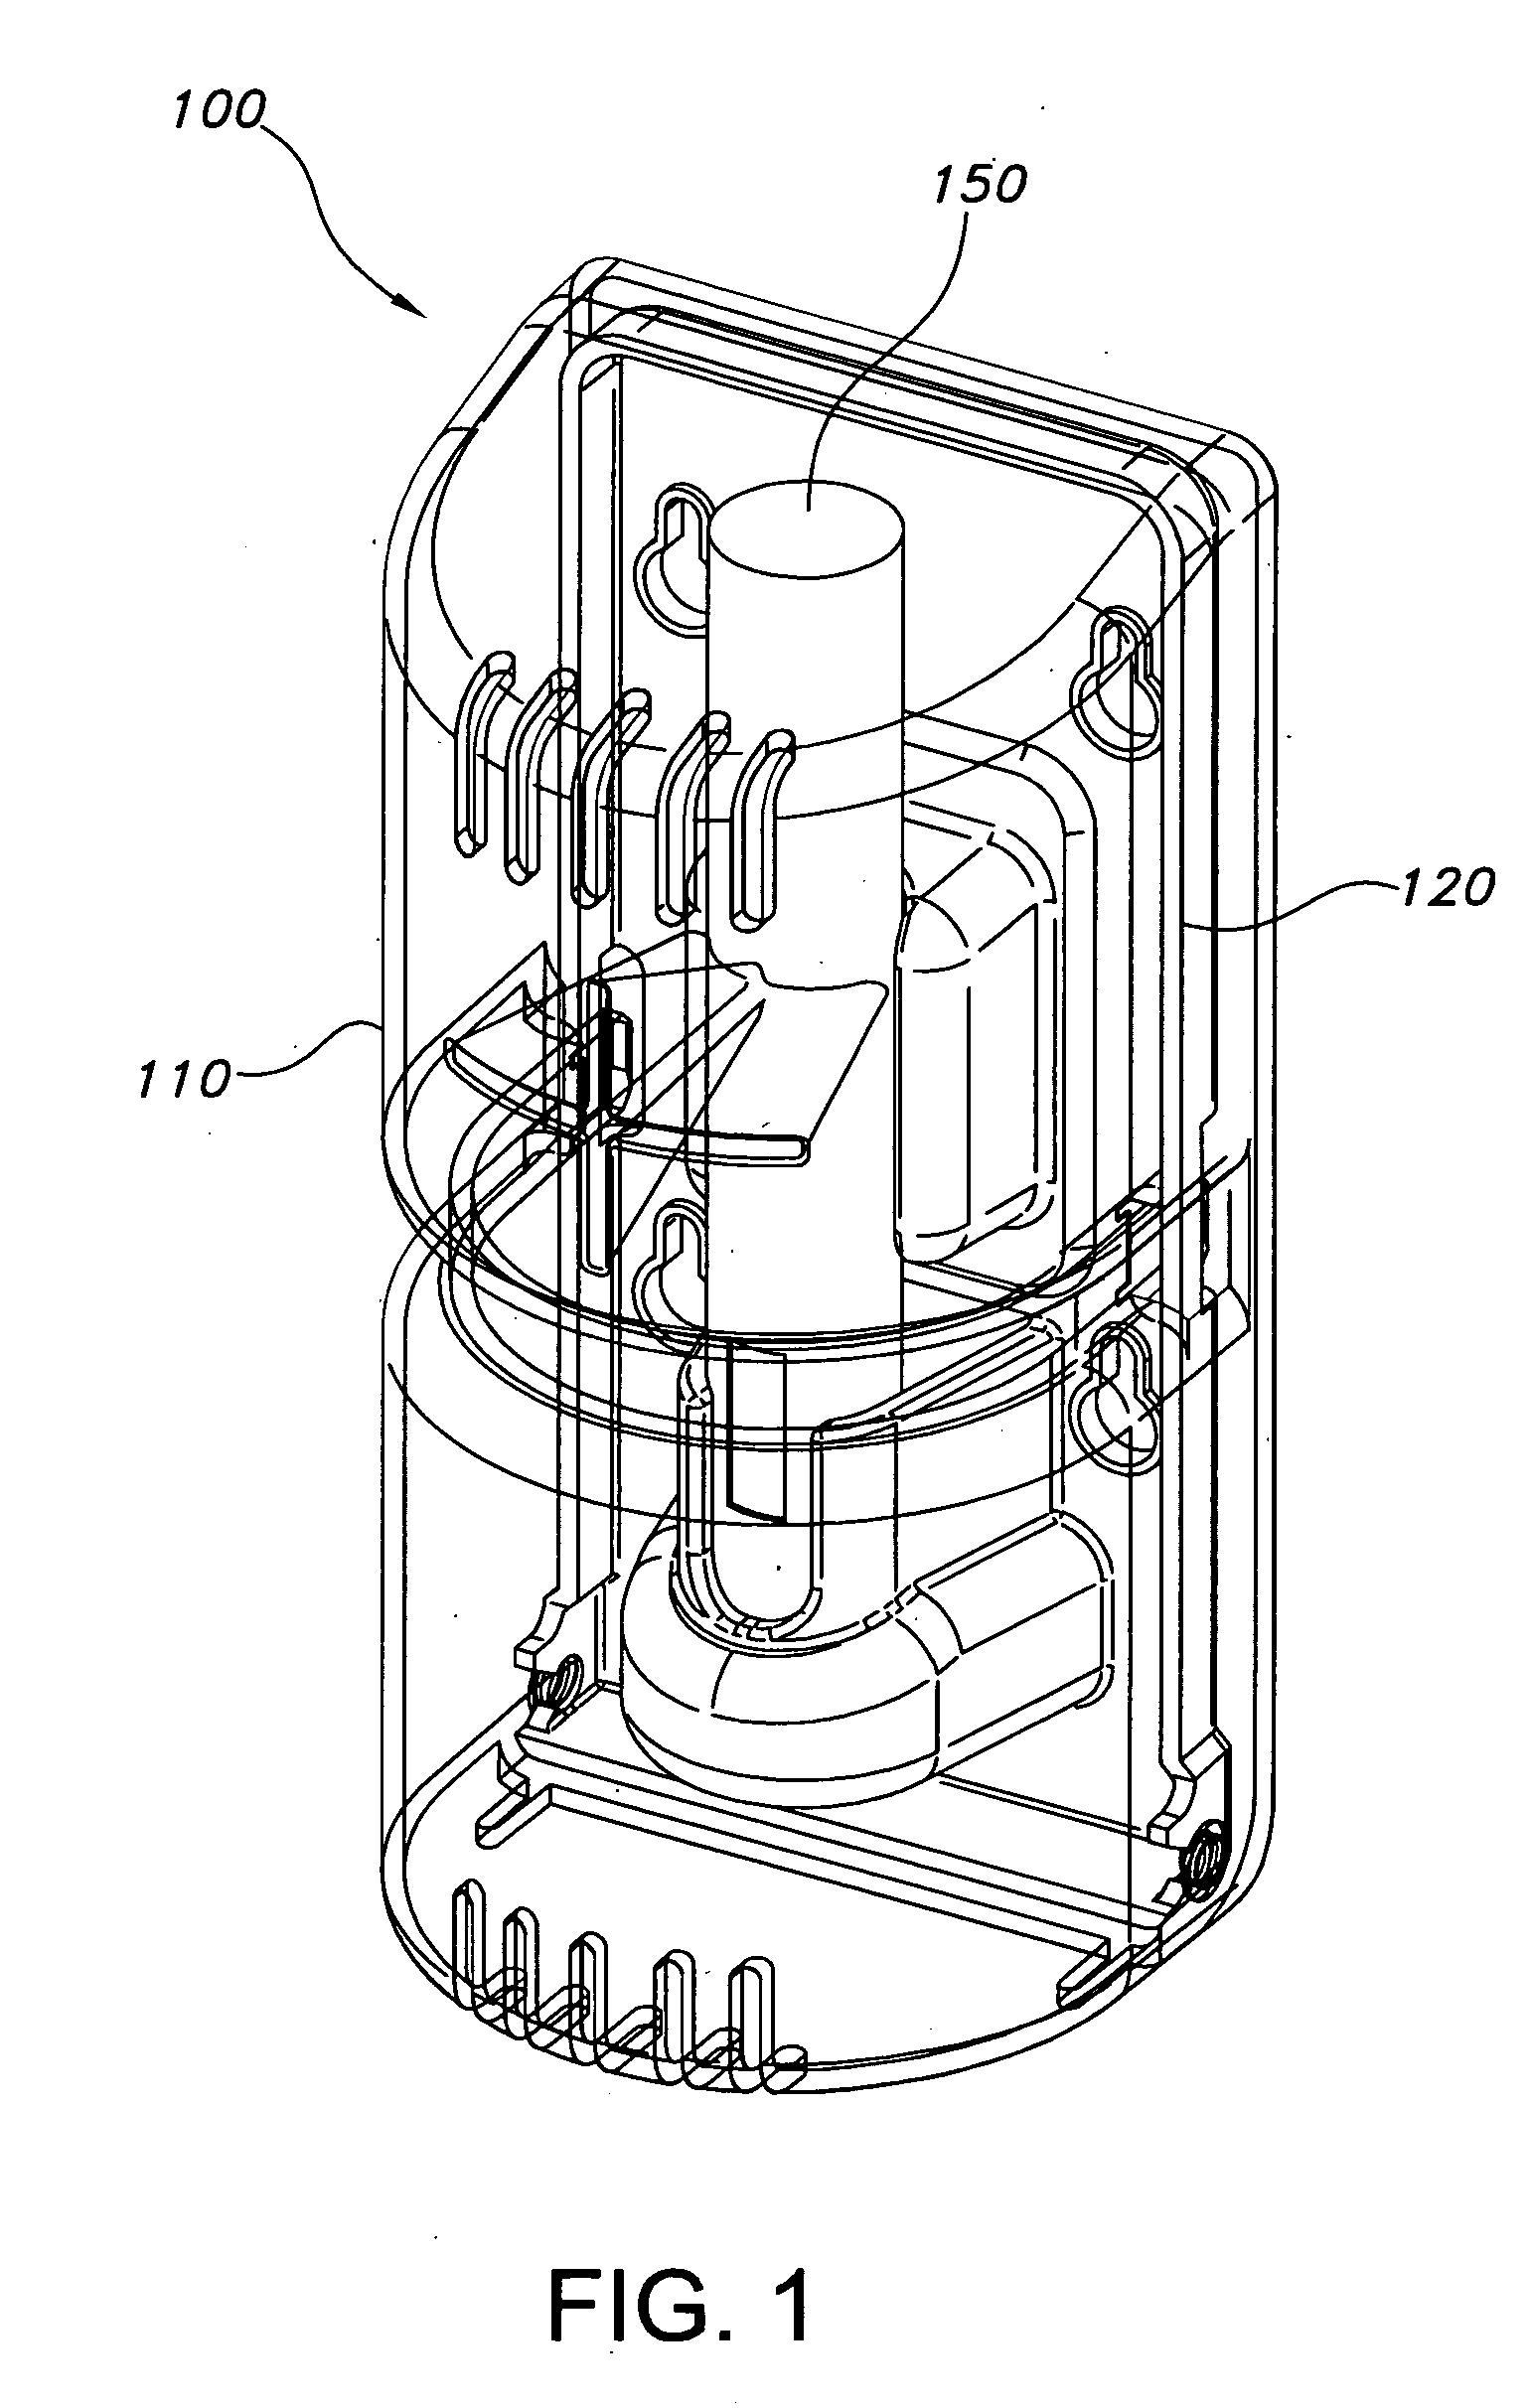 Auto-injector storage and dispensing unit